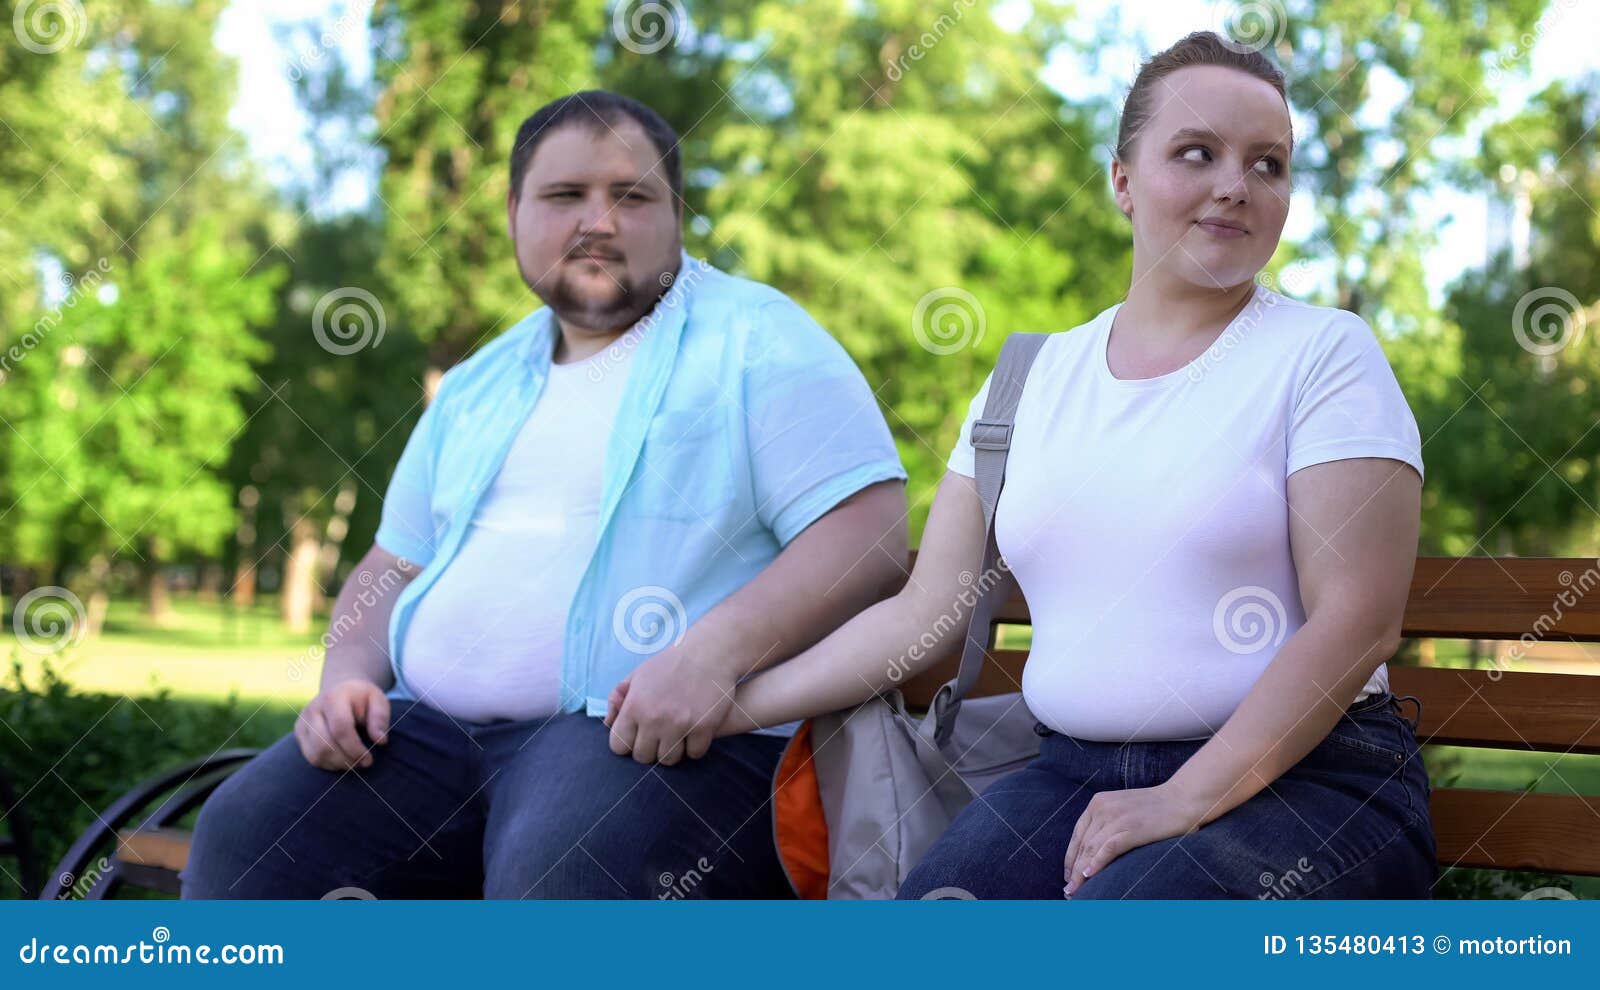 Dating Sites For Overweight Singles | Updated 2021